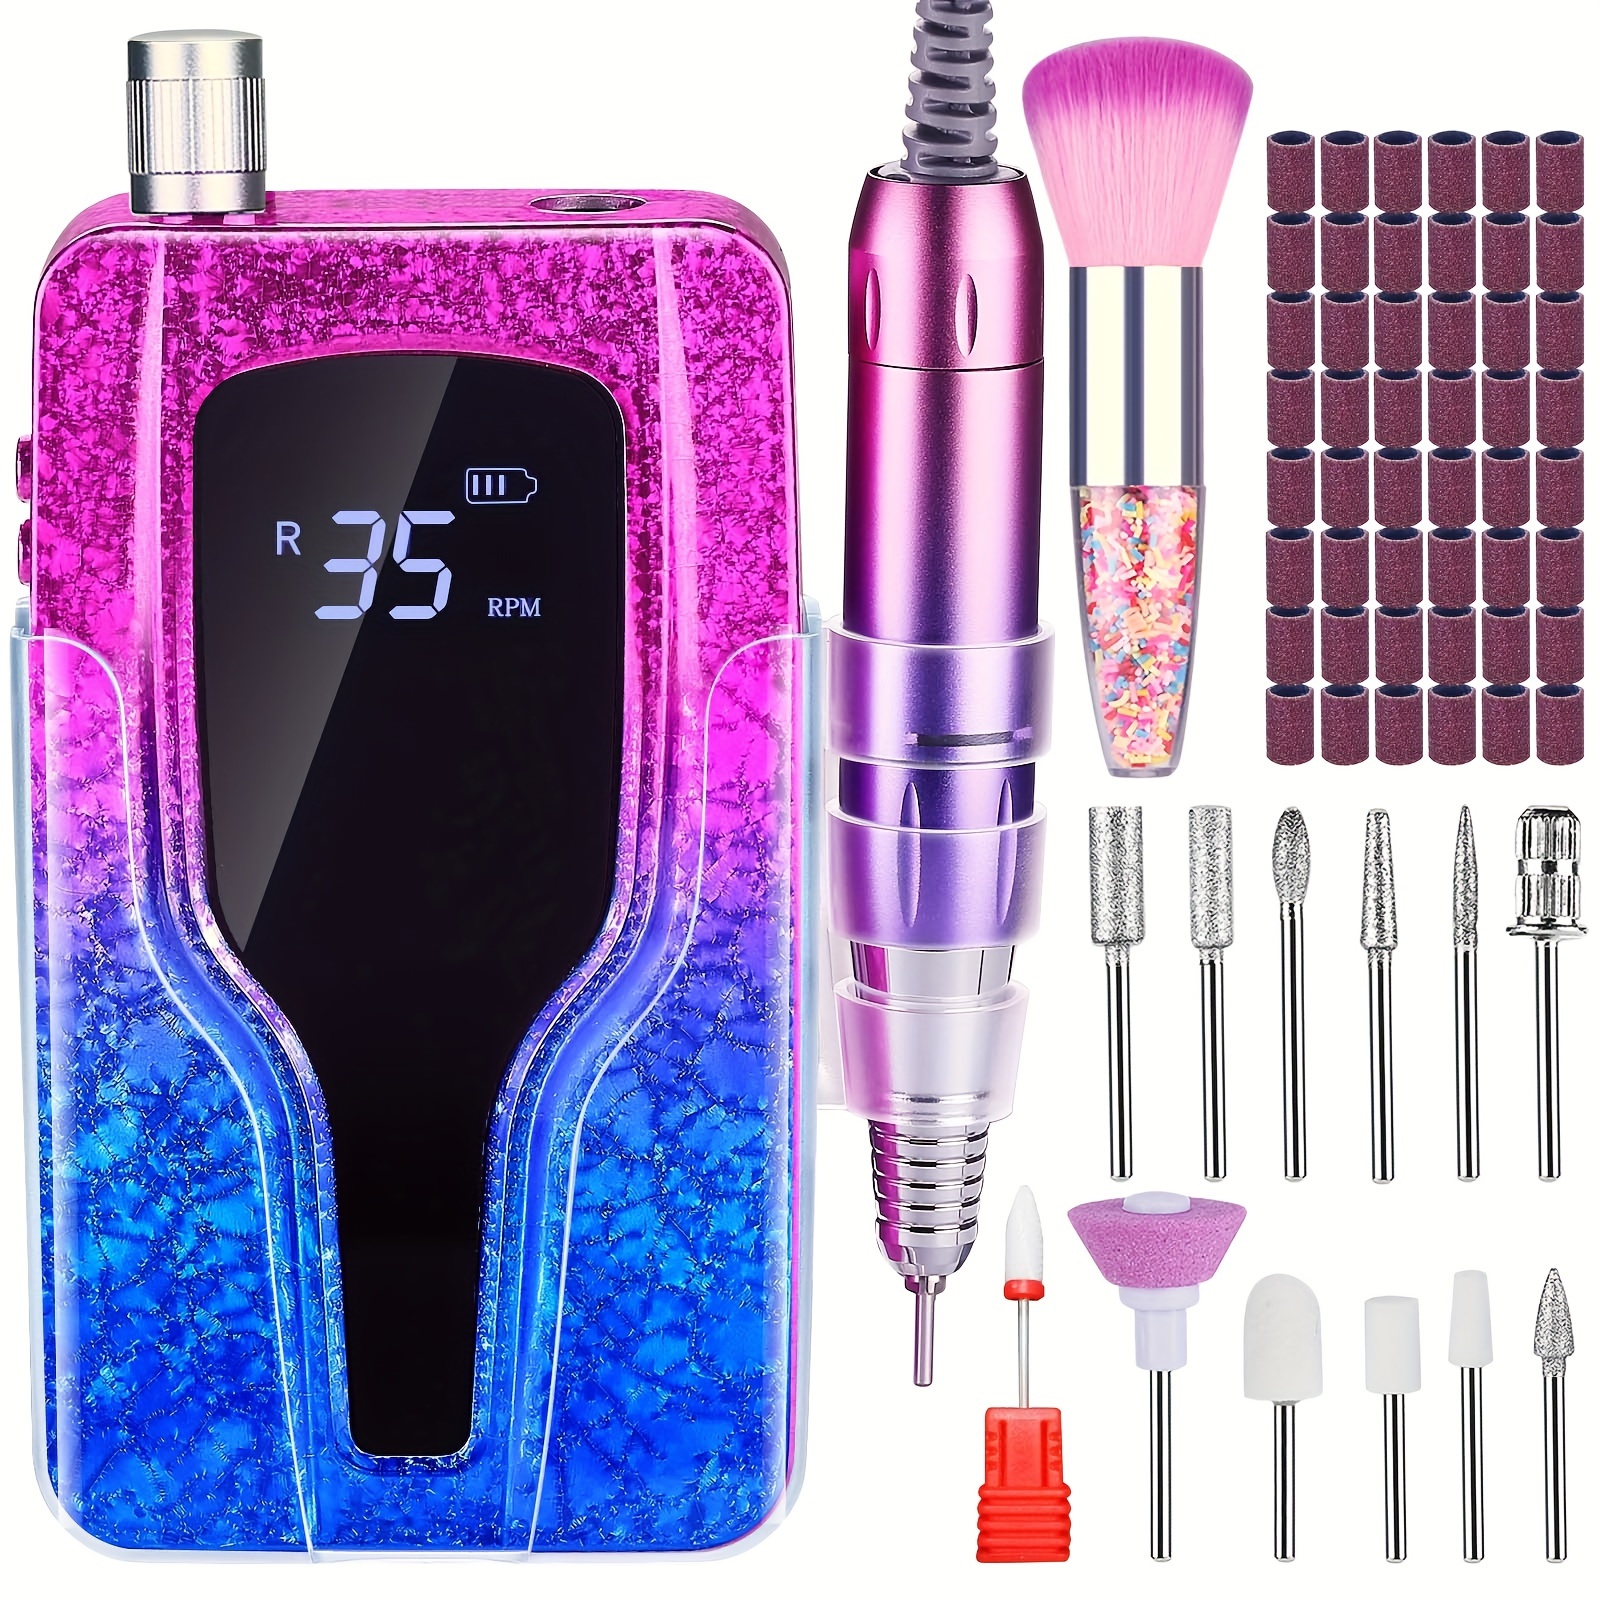 

Electric Nail Drill, 35000 Rpm Nail Drill Machine, Rechargeable Electric Nail File Machine For Acrylic Nails Gel Polishing Removing, Portable Cordless Efile With Bits Kit For Manicure Salon Home Blue